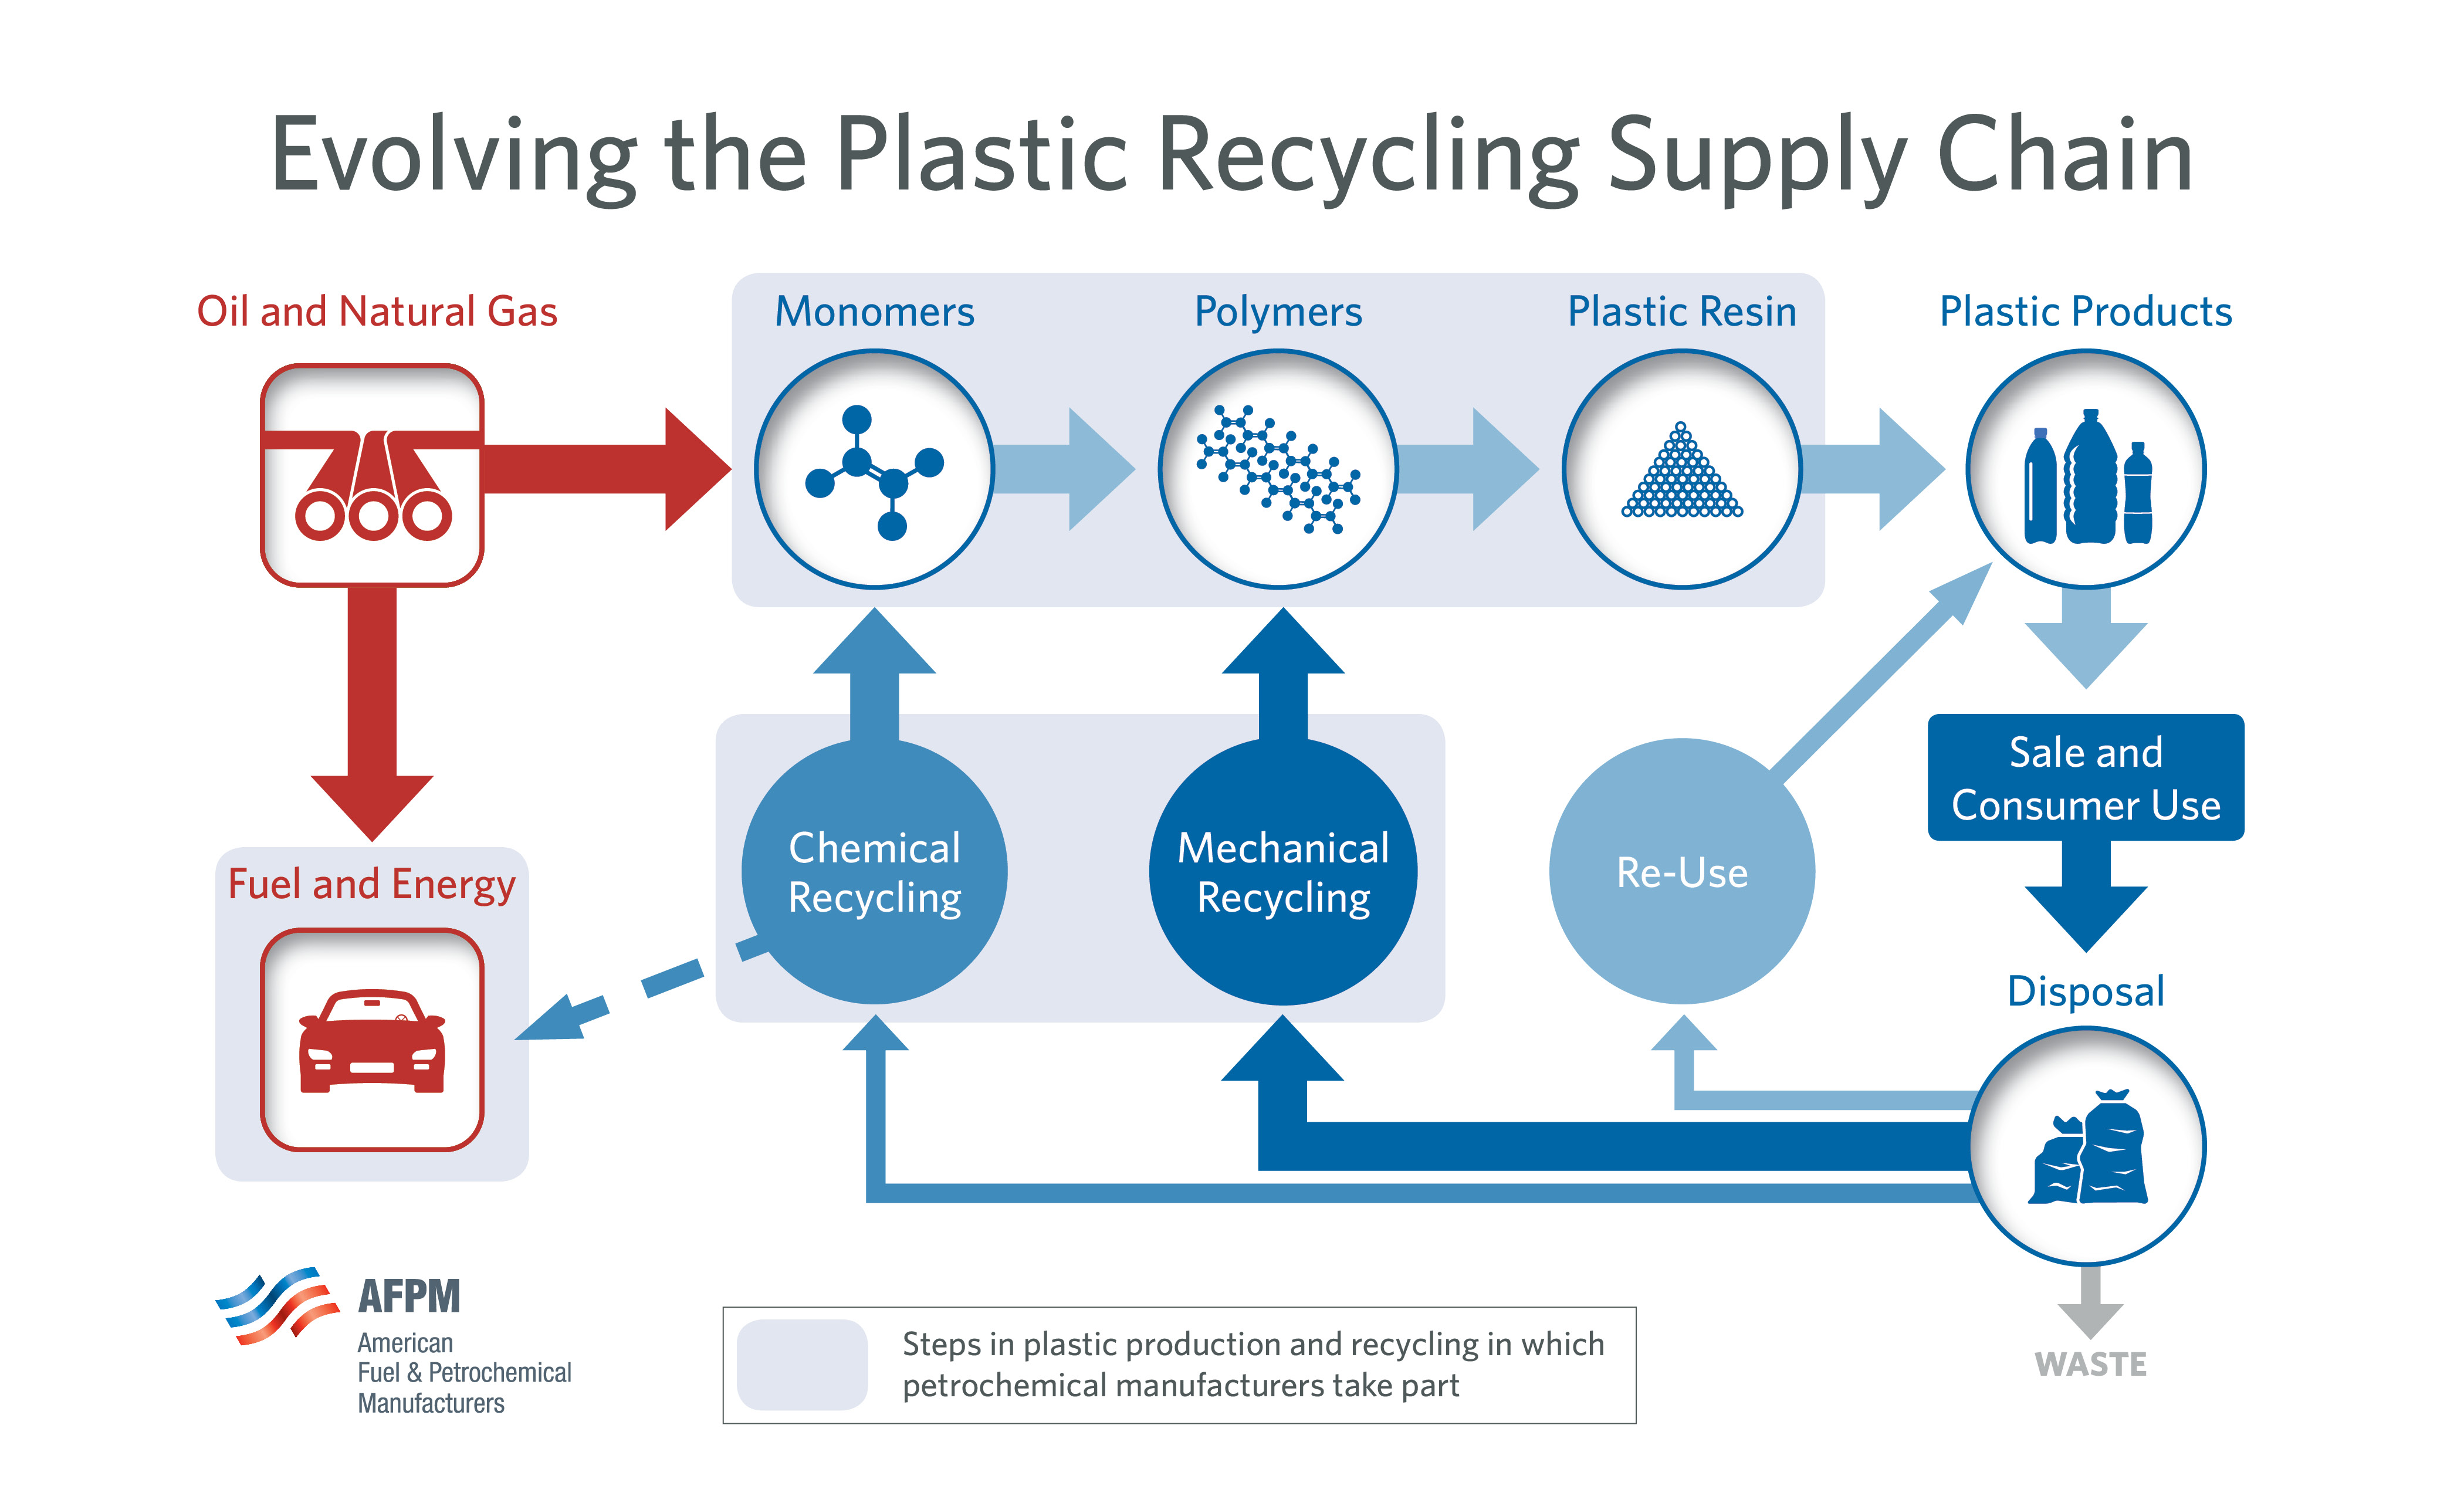 Petrochemical manufacturers use chemistry to make plastic